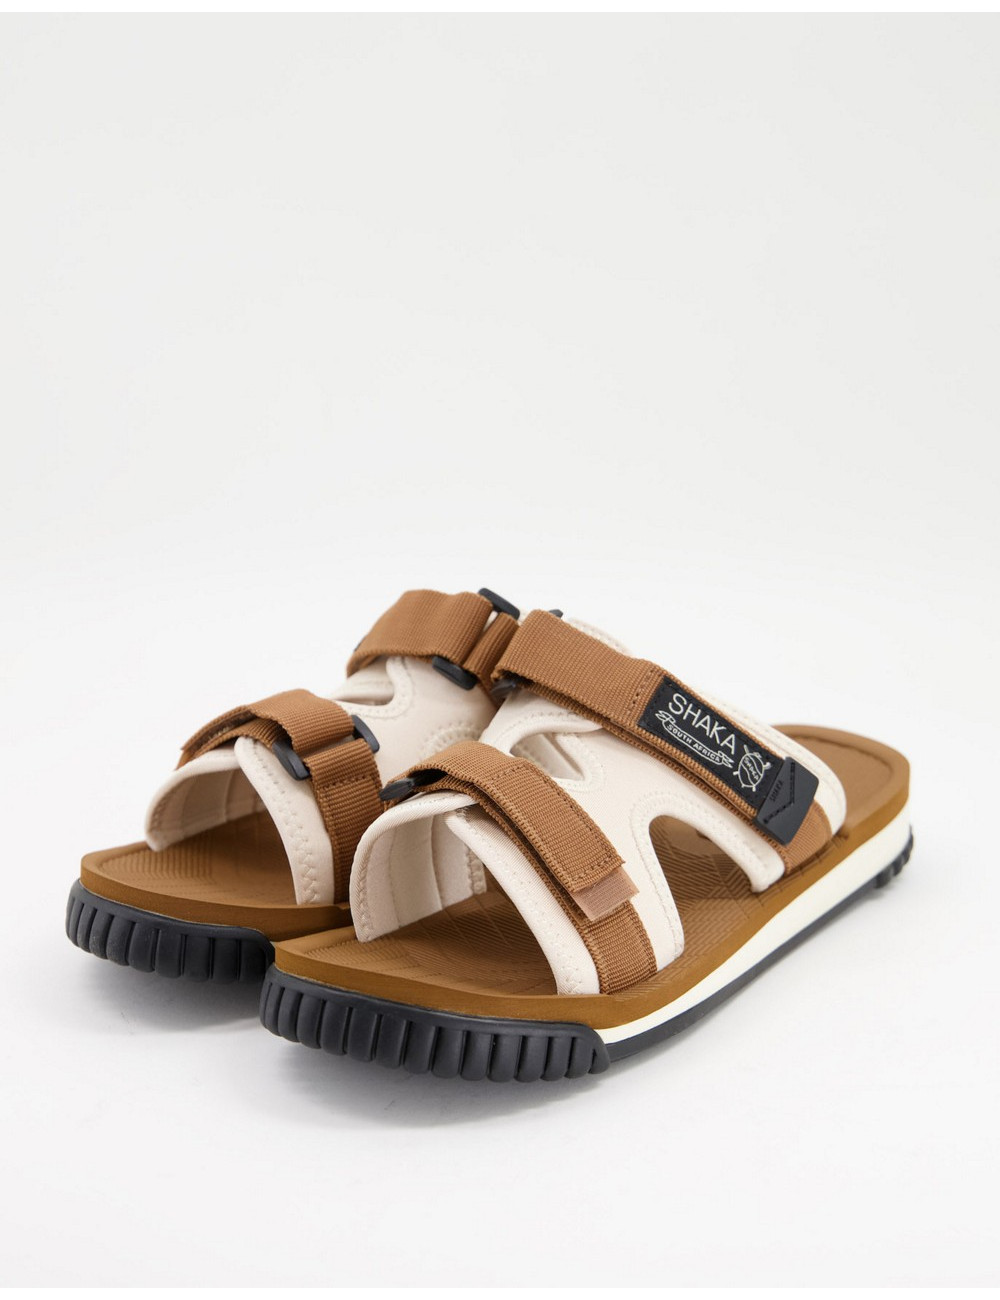 Shaka chill out sliders in...